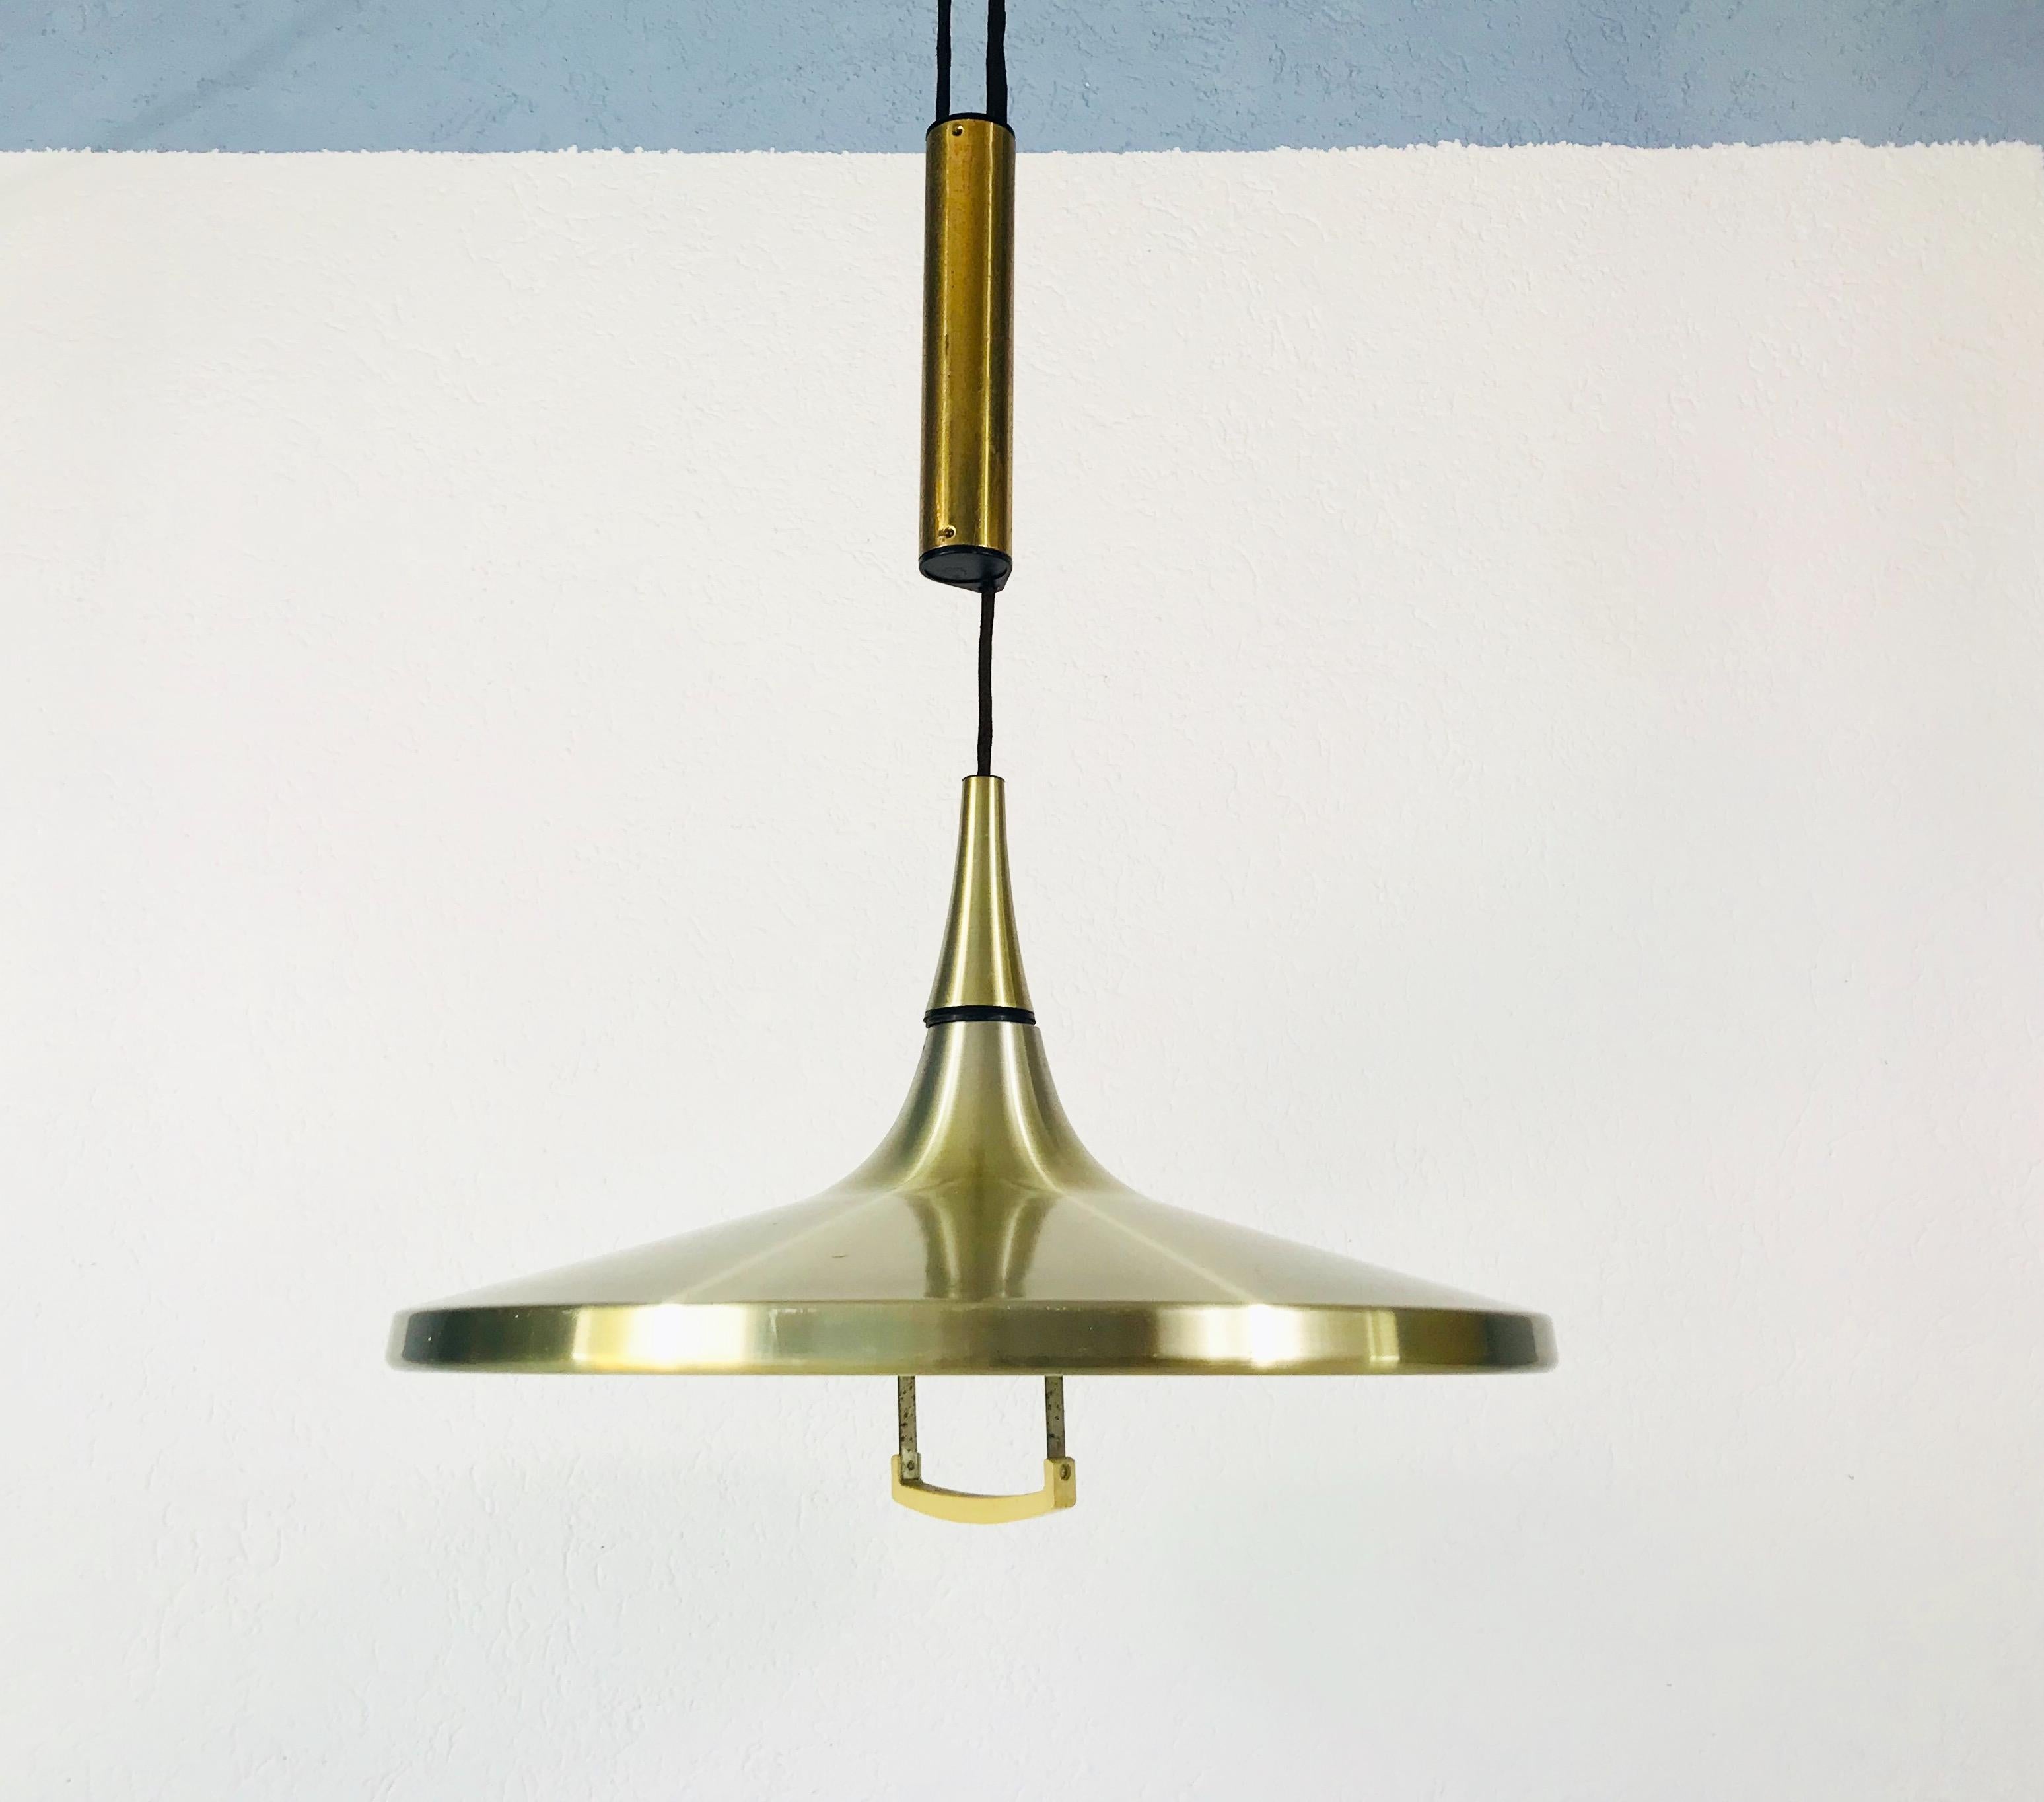 A counterweight ceiling lamp by Erco made in Germany in the 1970s. It has a heavy counterweight which is secure to the black rope. The lamp shade is made of aluminum and has a plastic handle below. The shape of the lamp is similar to a witch